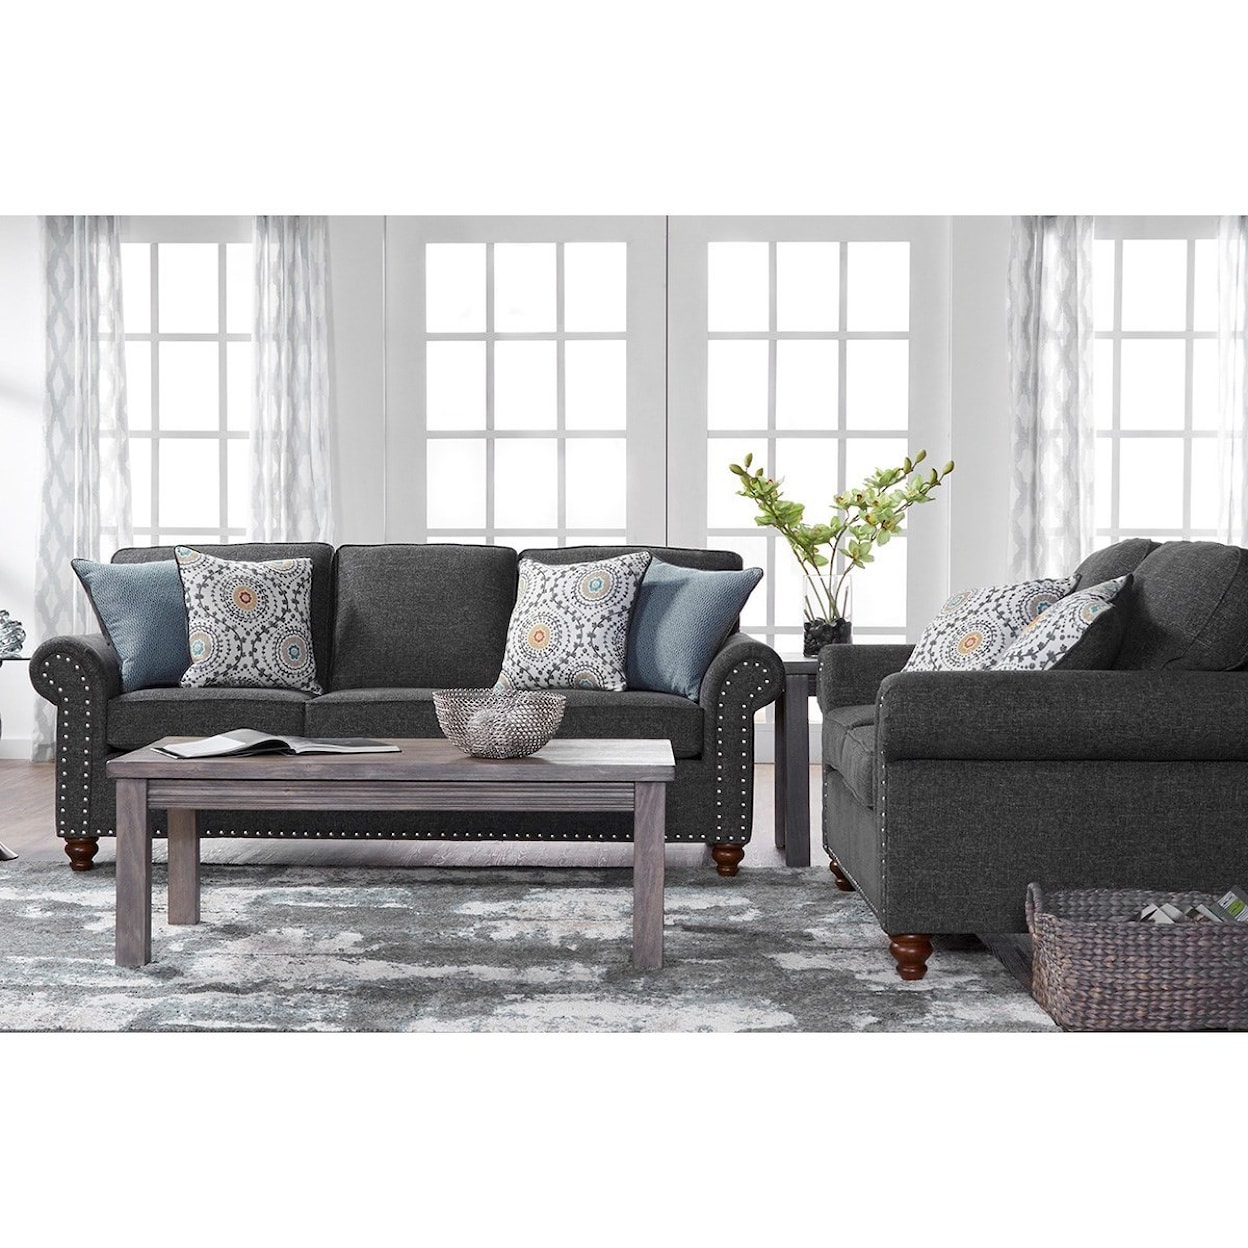 Serta Upholstery by Hughes Furniture 17655 Traditional Loveseat